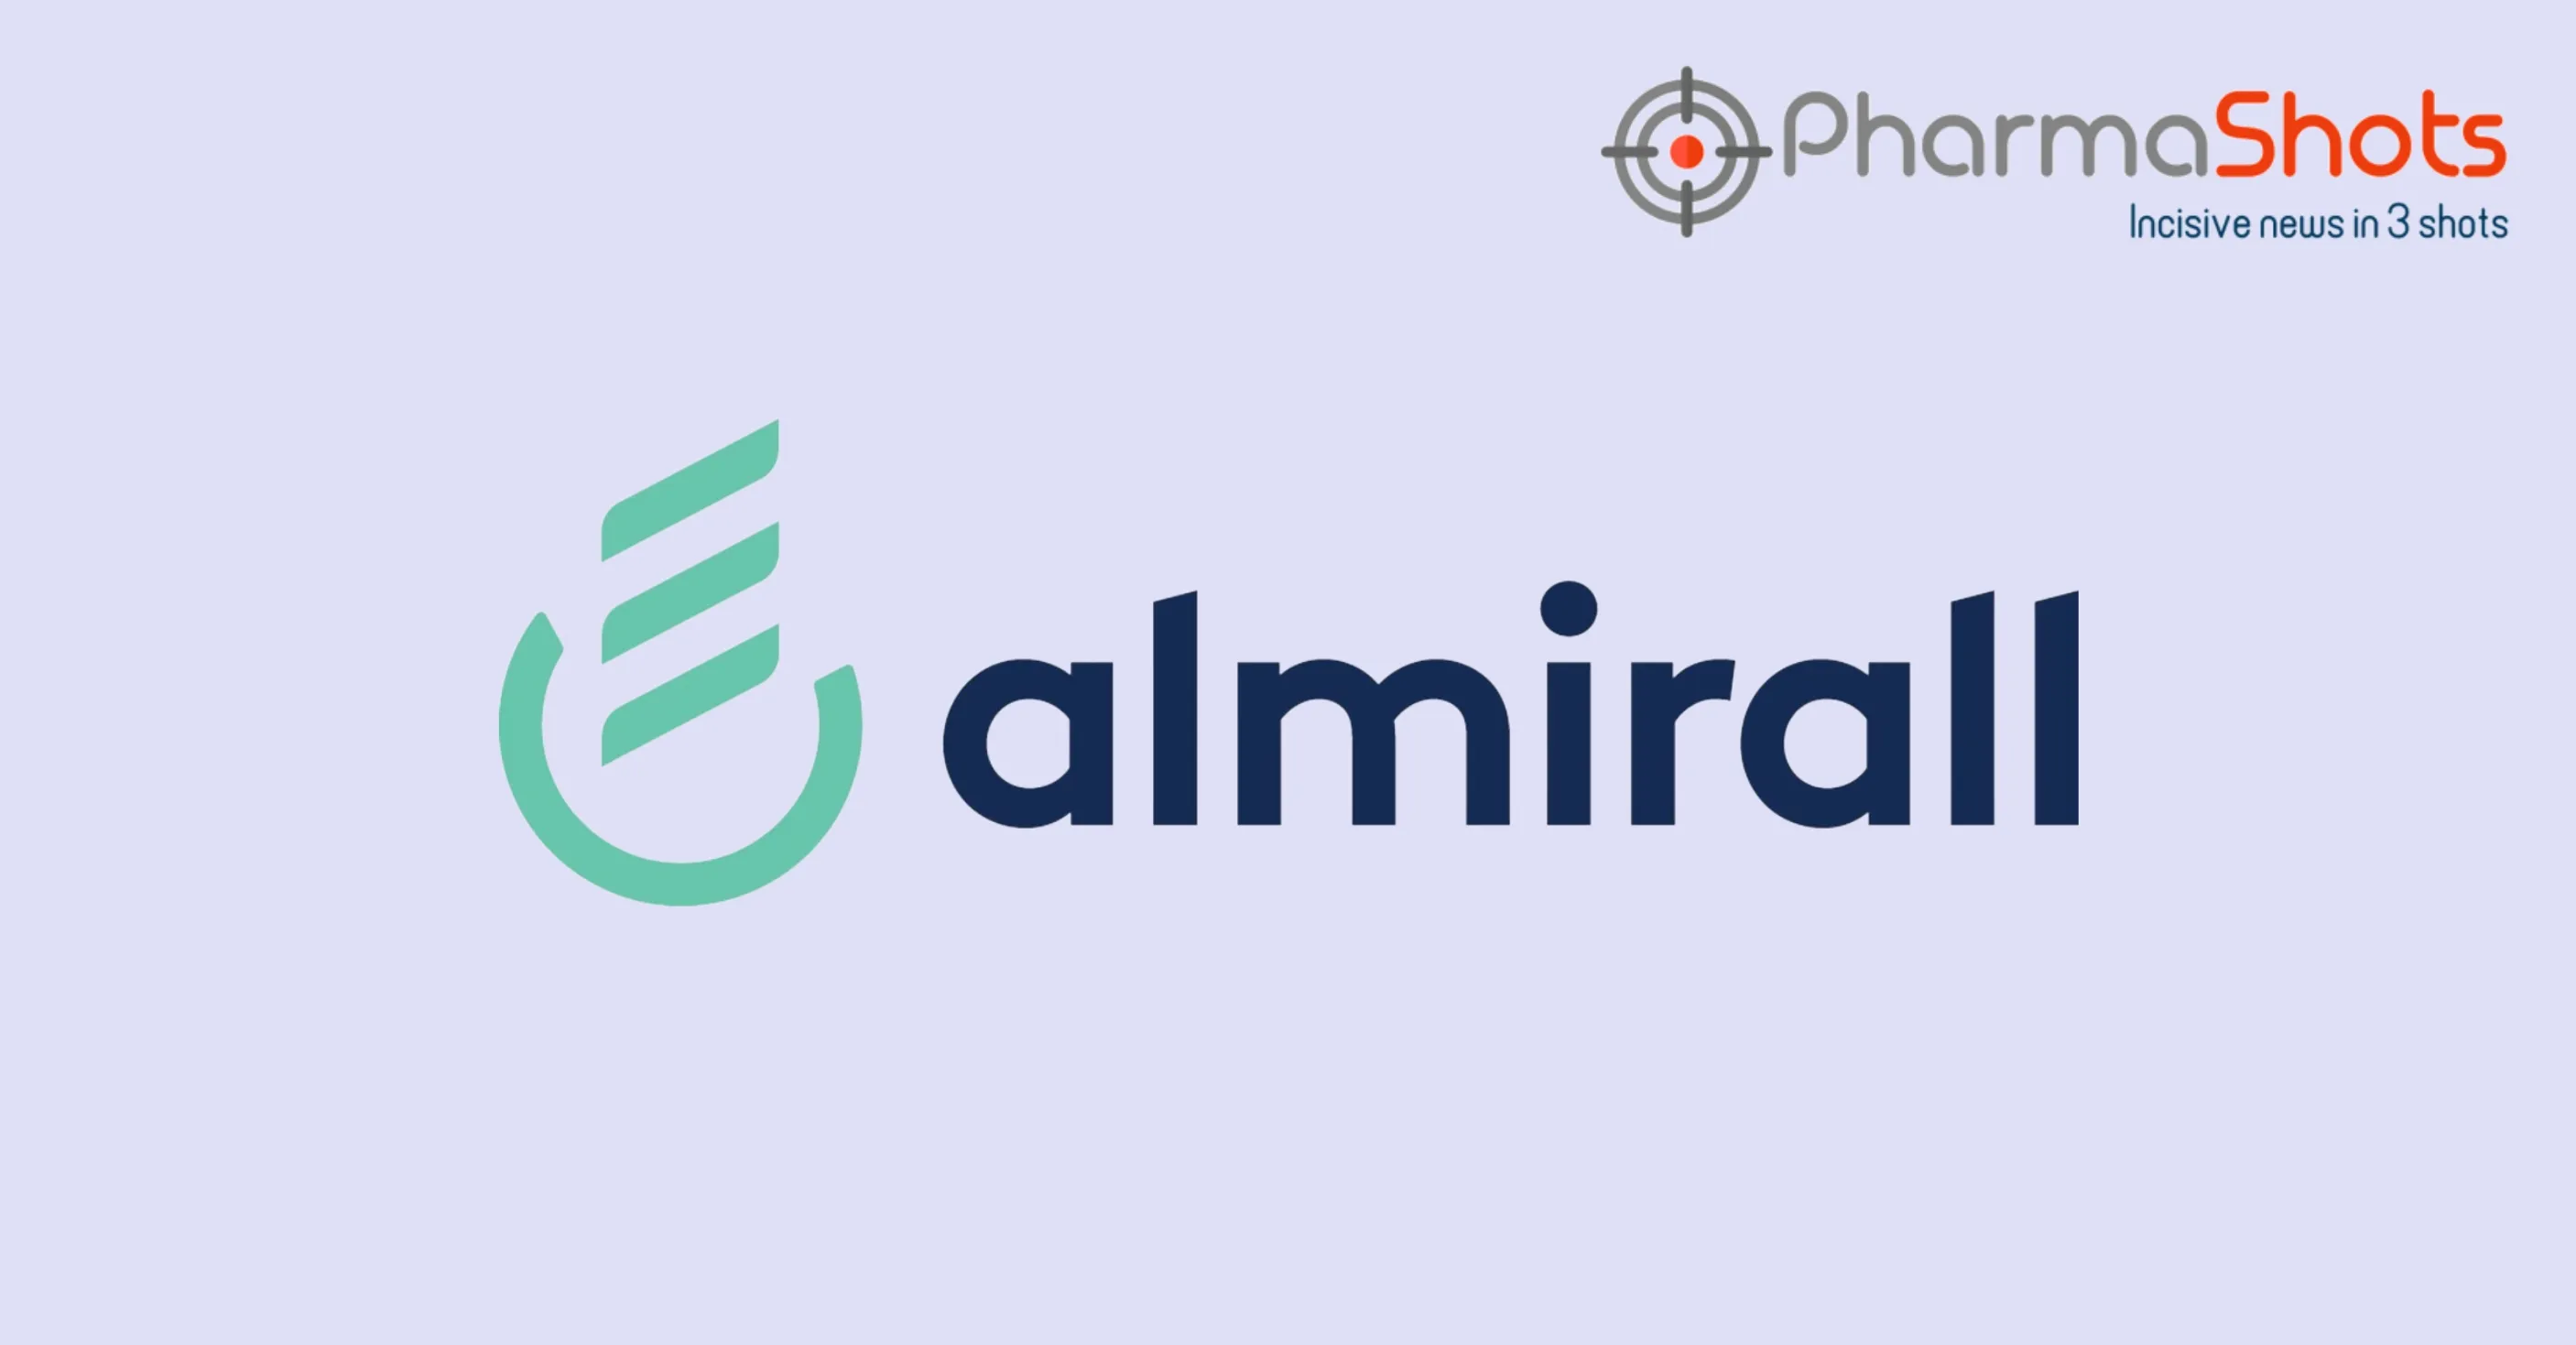 Almirall Received EC’s Approval for Ebglyss (lebrikizumab) to Treat Moderate-to-severe Atopic Dermatitis